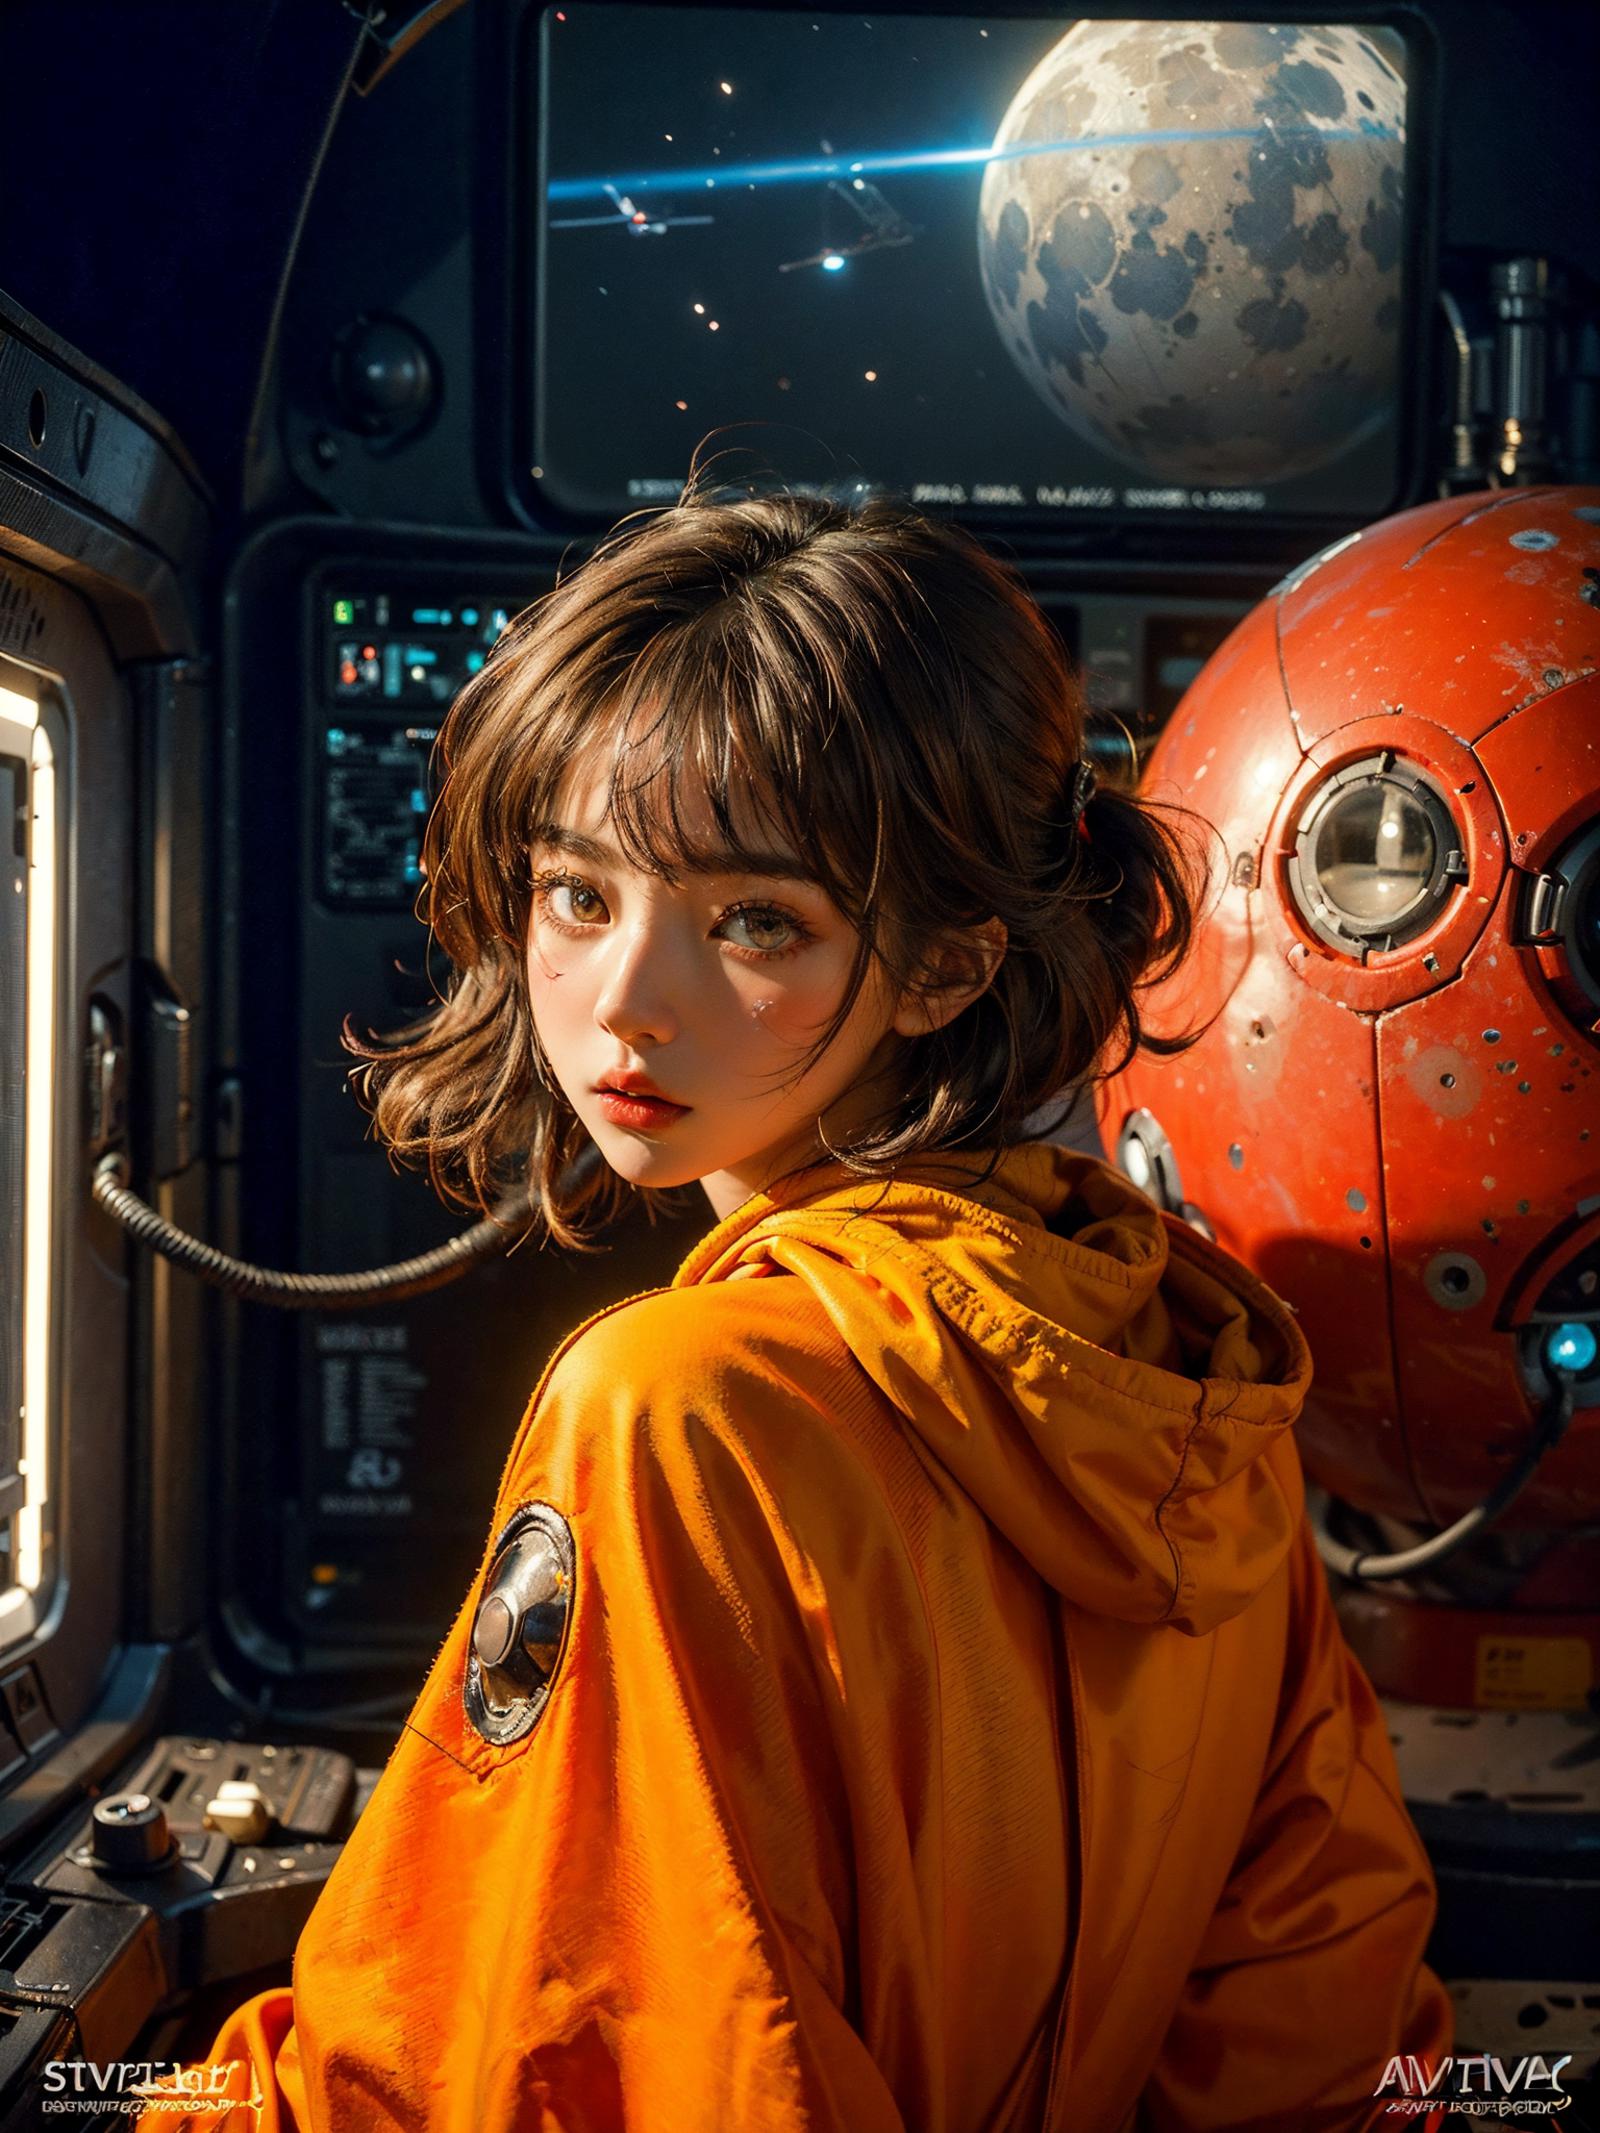 A young woman in an orange jacket standing in a spaceship.